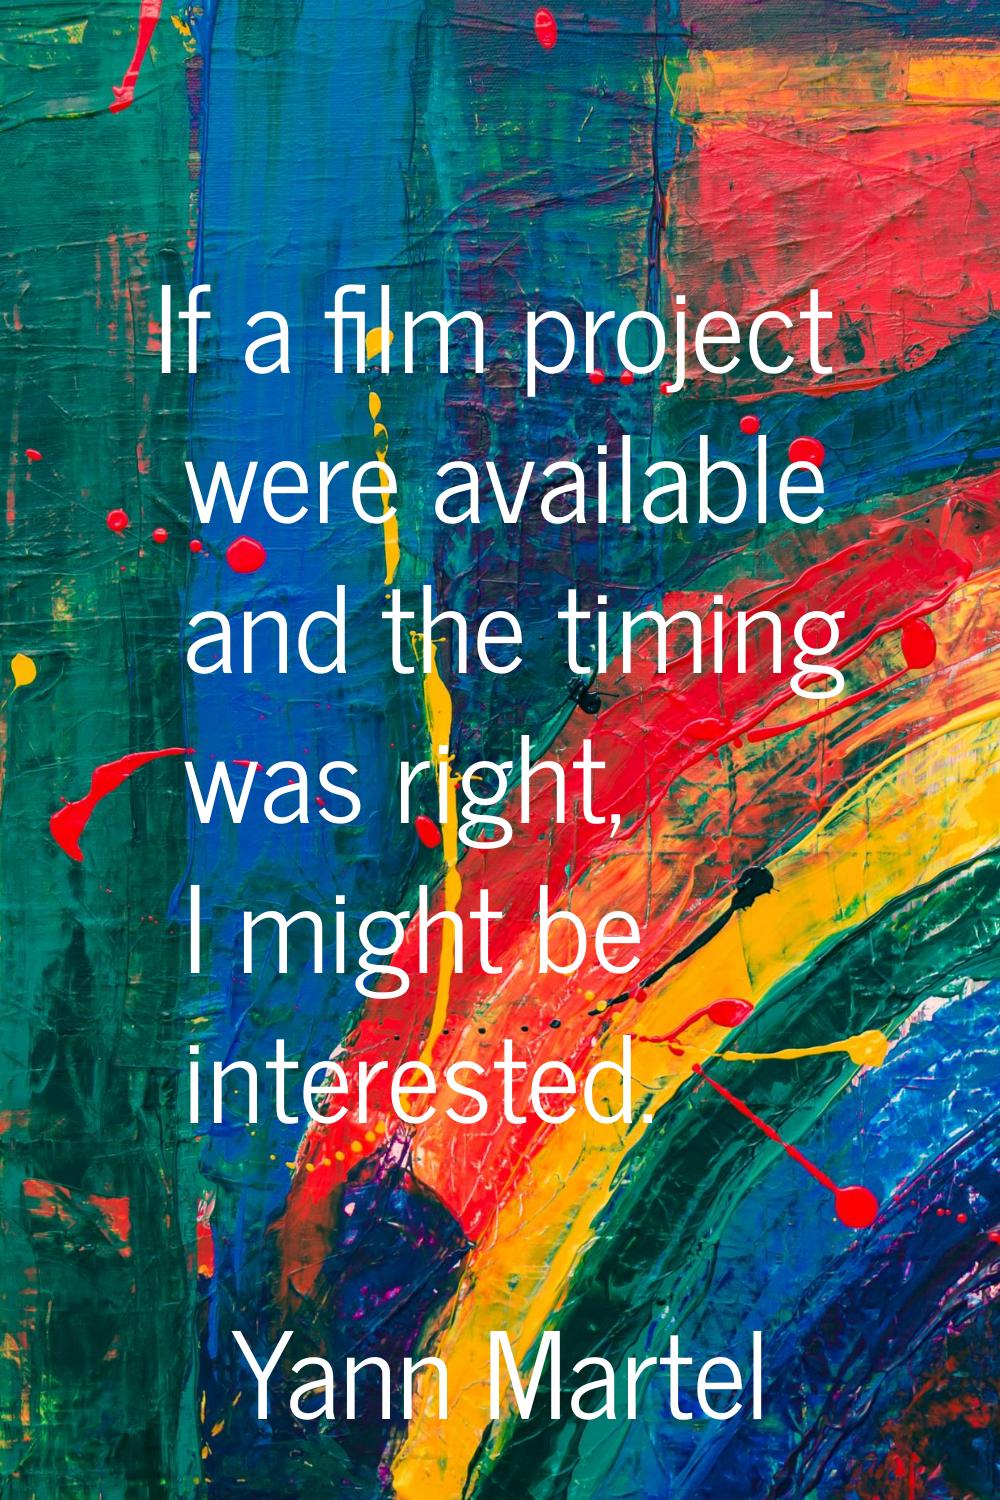 If a film project were available and the timing was right, I might be interested.